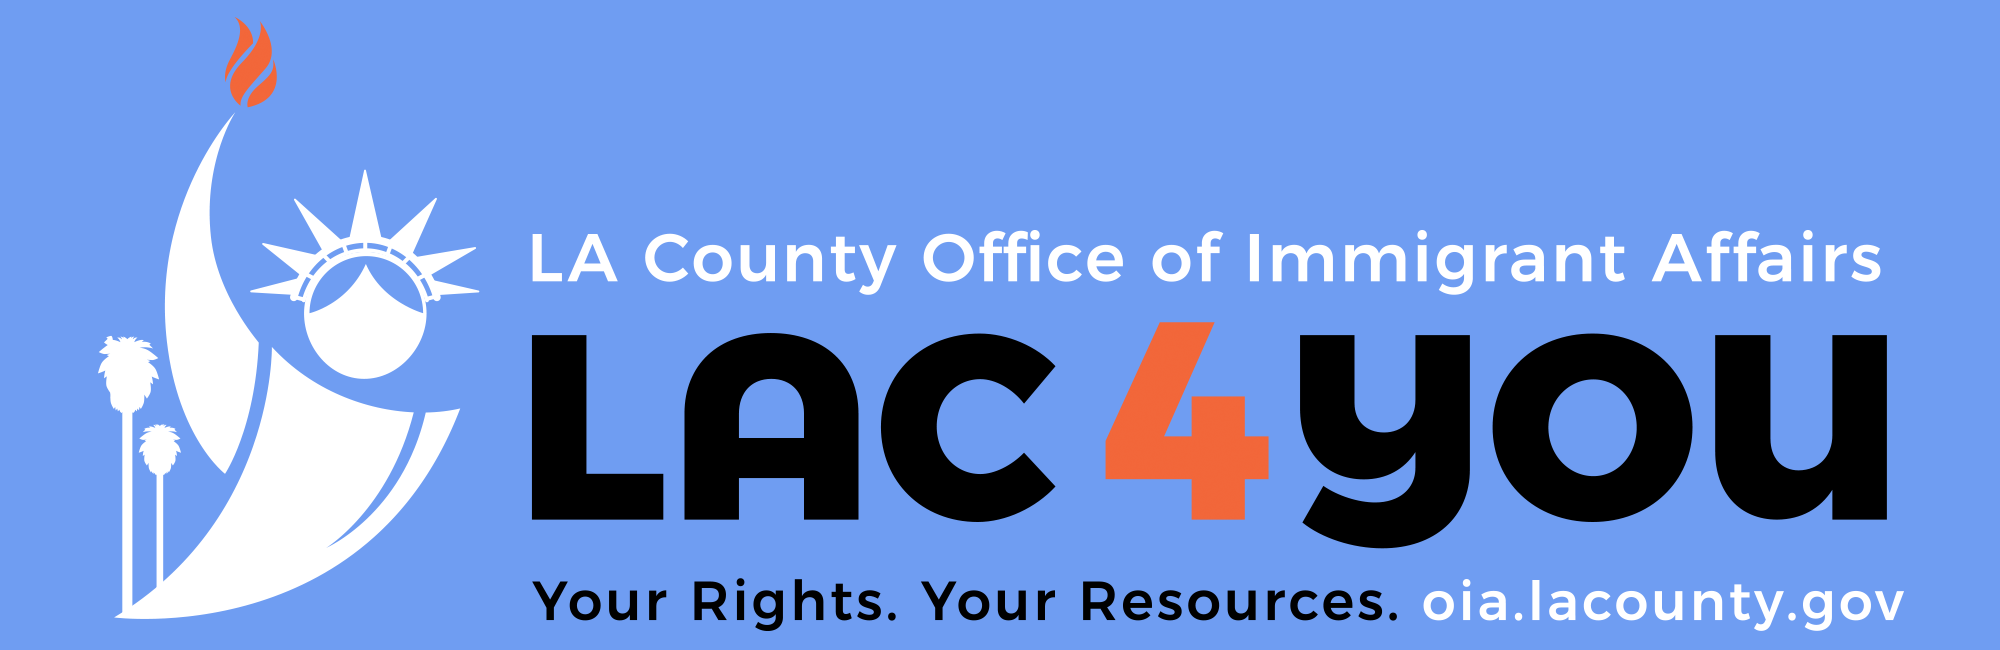 LA County Office of Immigrant Affairs